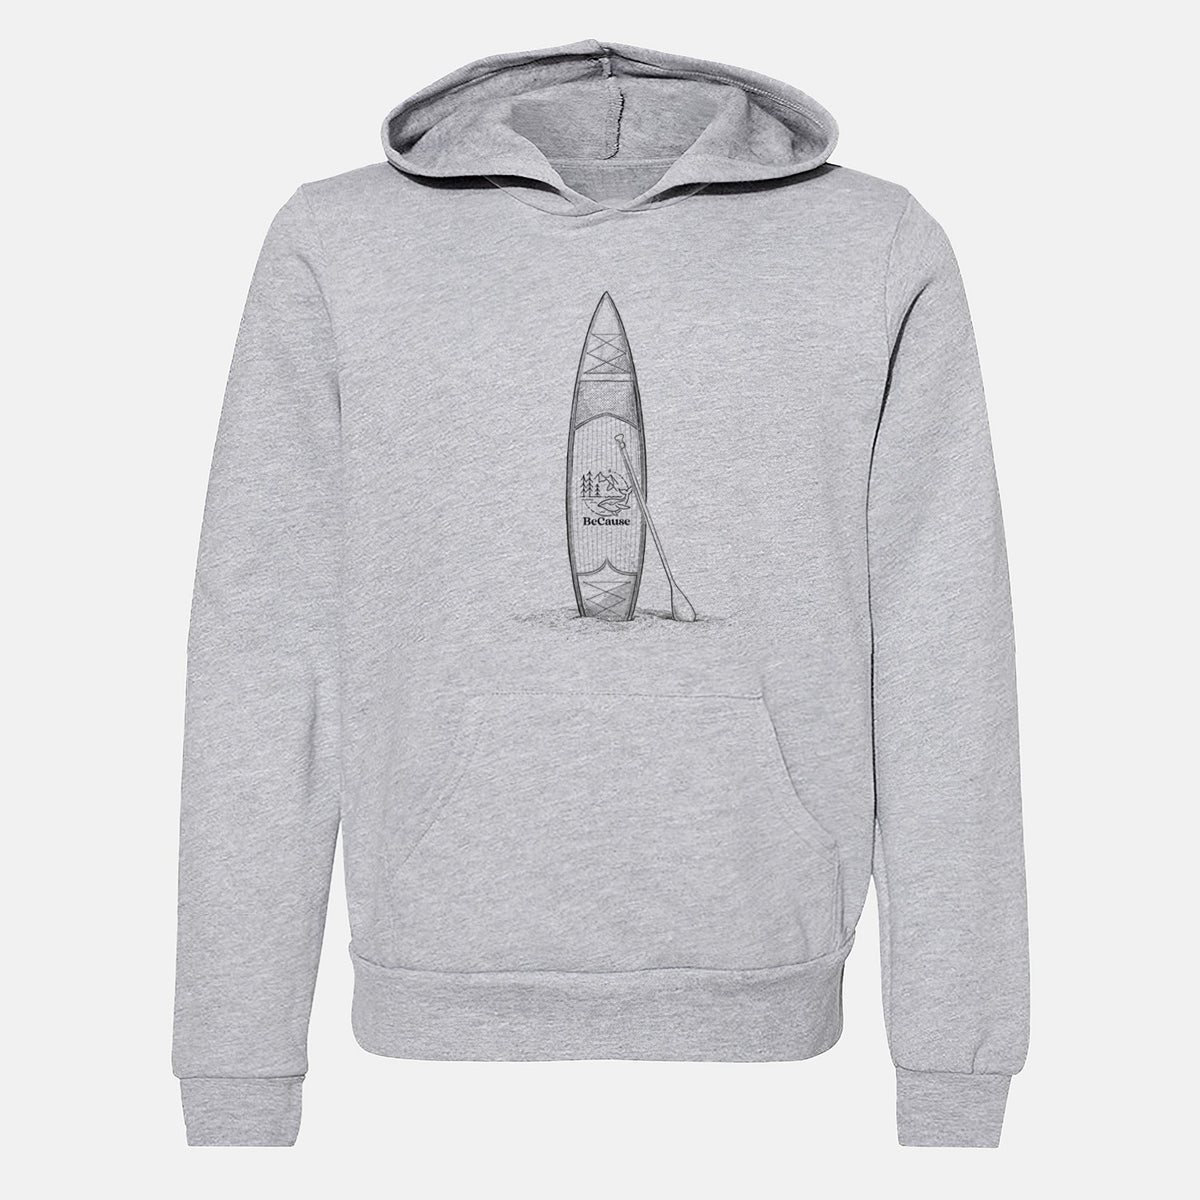 Stand-up Paddle Board - Youth Hoodie Sweatshirt